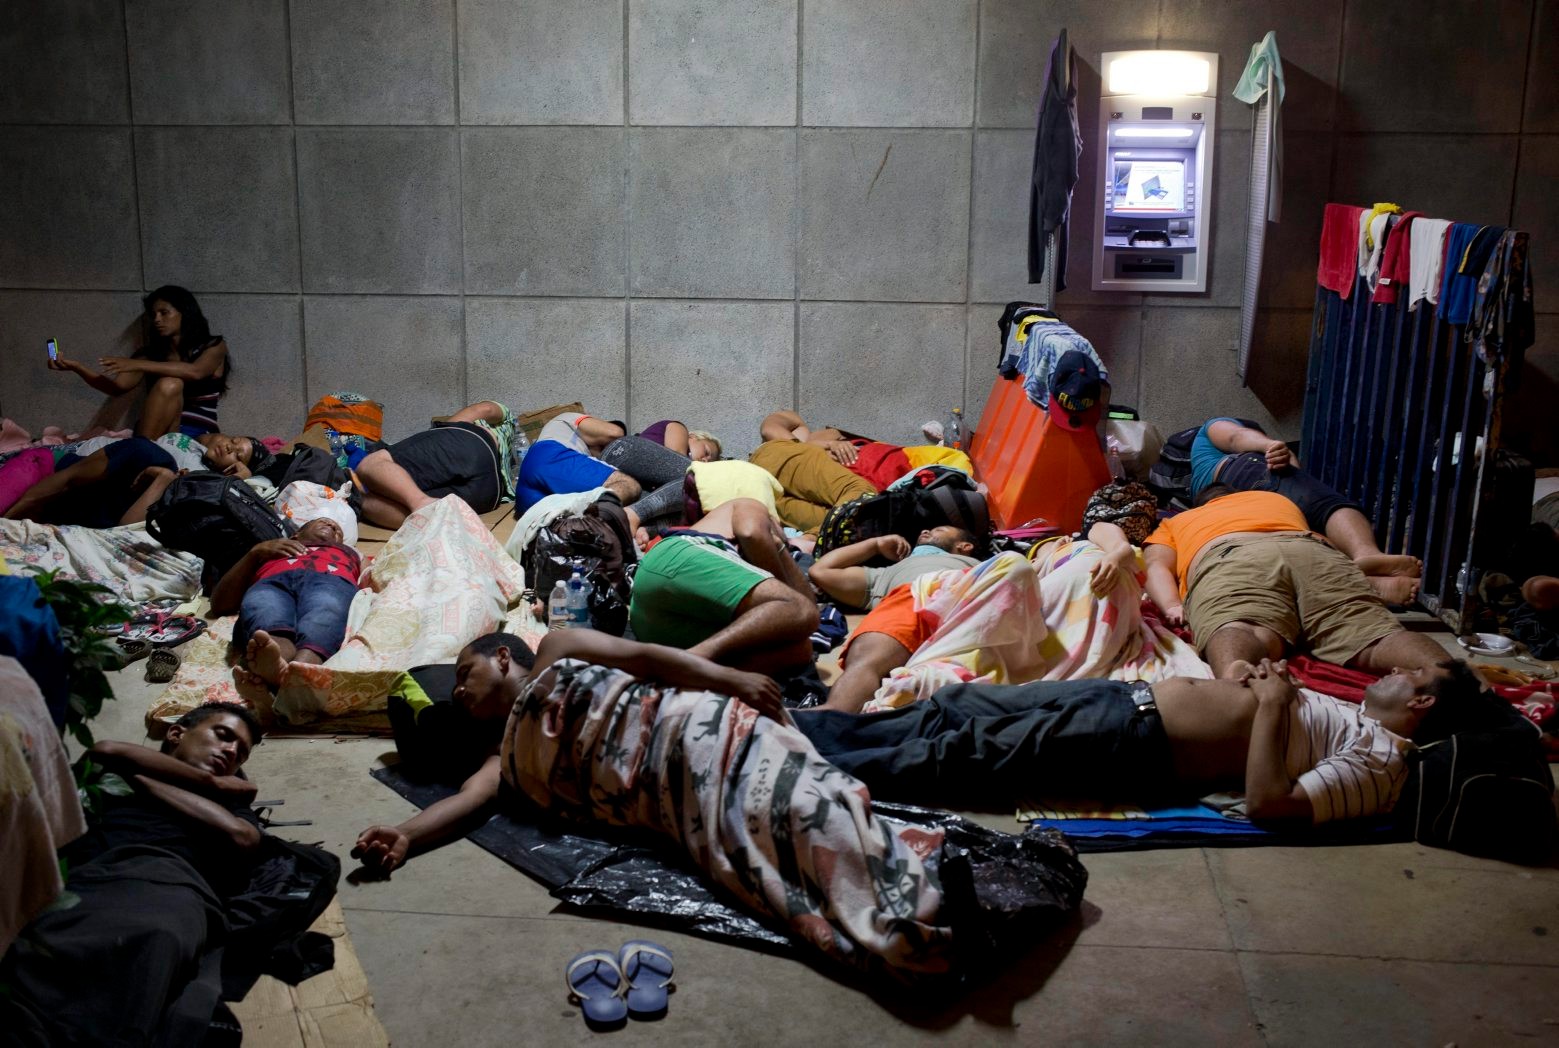 FILE - In this Nov. 21, 2015 file photo, a Cuban woman migrant uses her cell phone while other Cubans sleep, outside of the border control building in Penas Blancas, Costa Rica, on the border with Nicaragua which closed its borders to Cuban migrants. The Costa Rican Foreign Ministry said in a Dec. 28 statement that the first humanitarian transfer will airlift the Cuban migrants from that country to El Salvador in January. From there they will continue by bus toward Mexico. The number of Cubans stranded in Costa Rica has reached at least 8,000 since neighboring Nicaragua closed its border to them weeks ago.  (AP Photo/Esteban Felix, File) Costa Rica Cuba Migrants